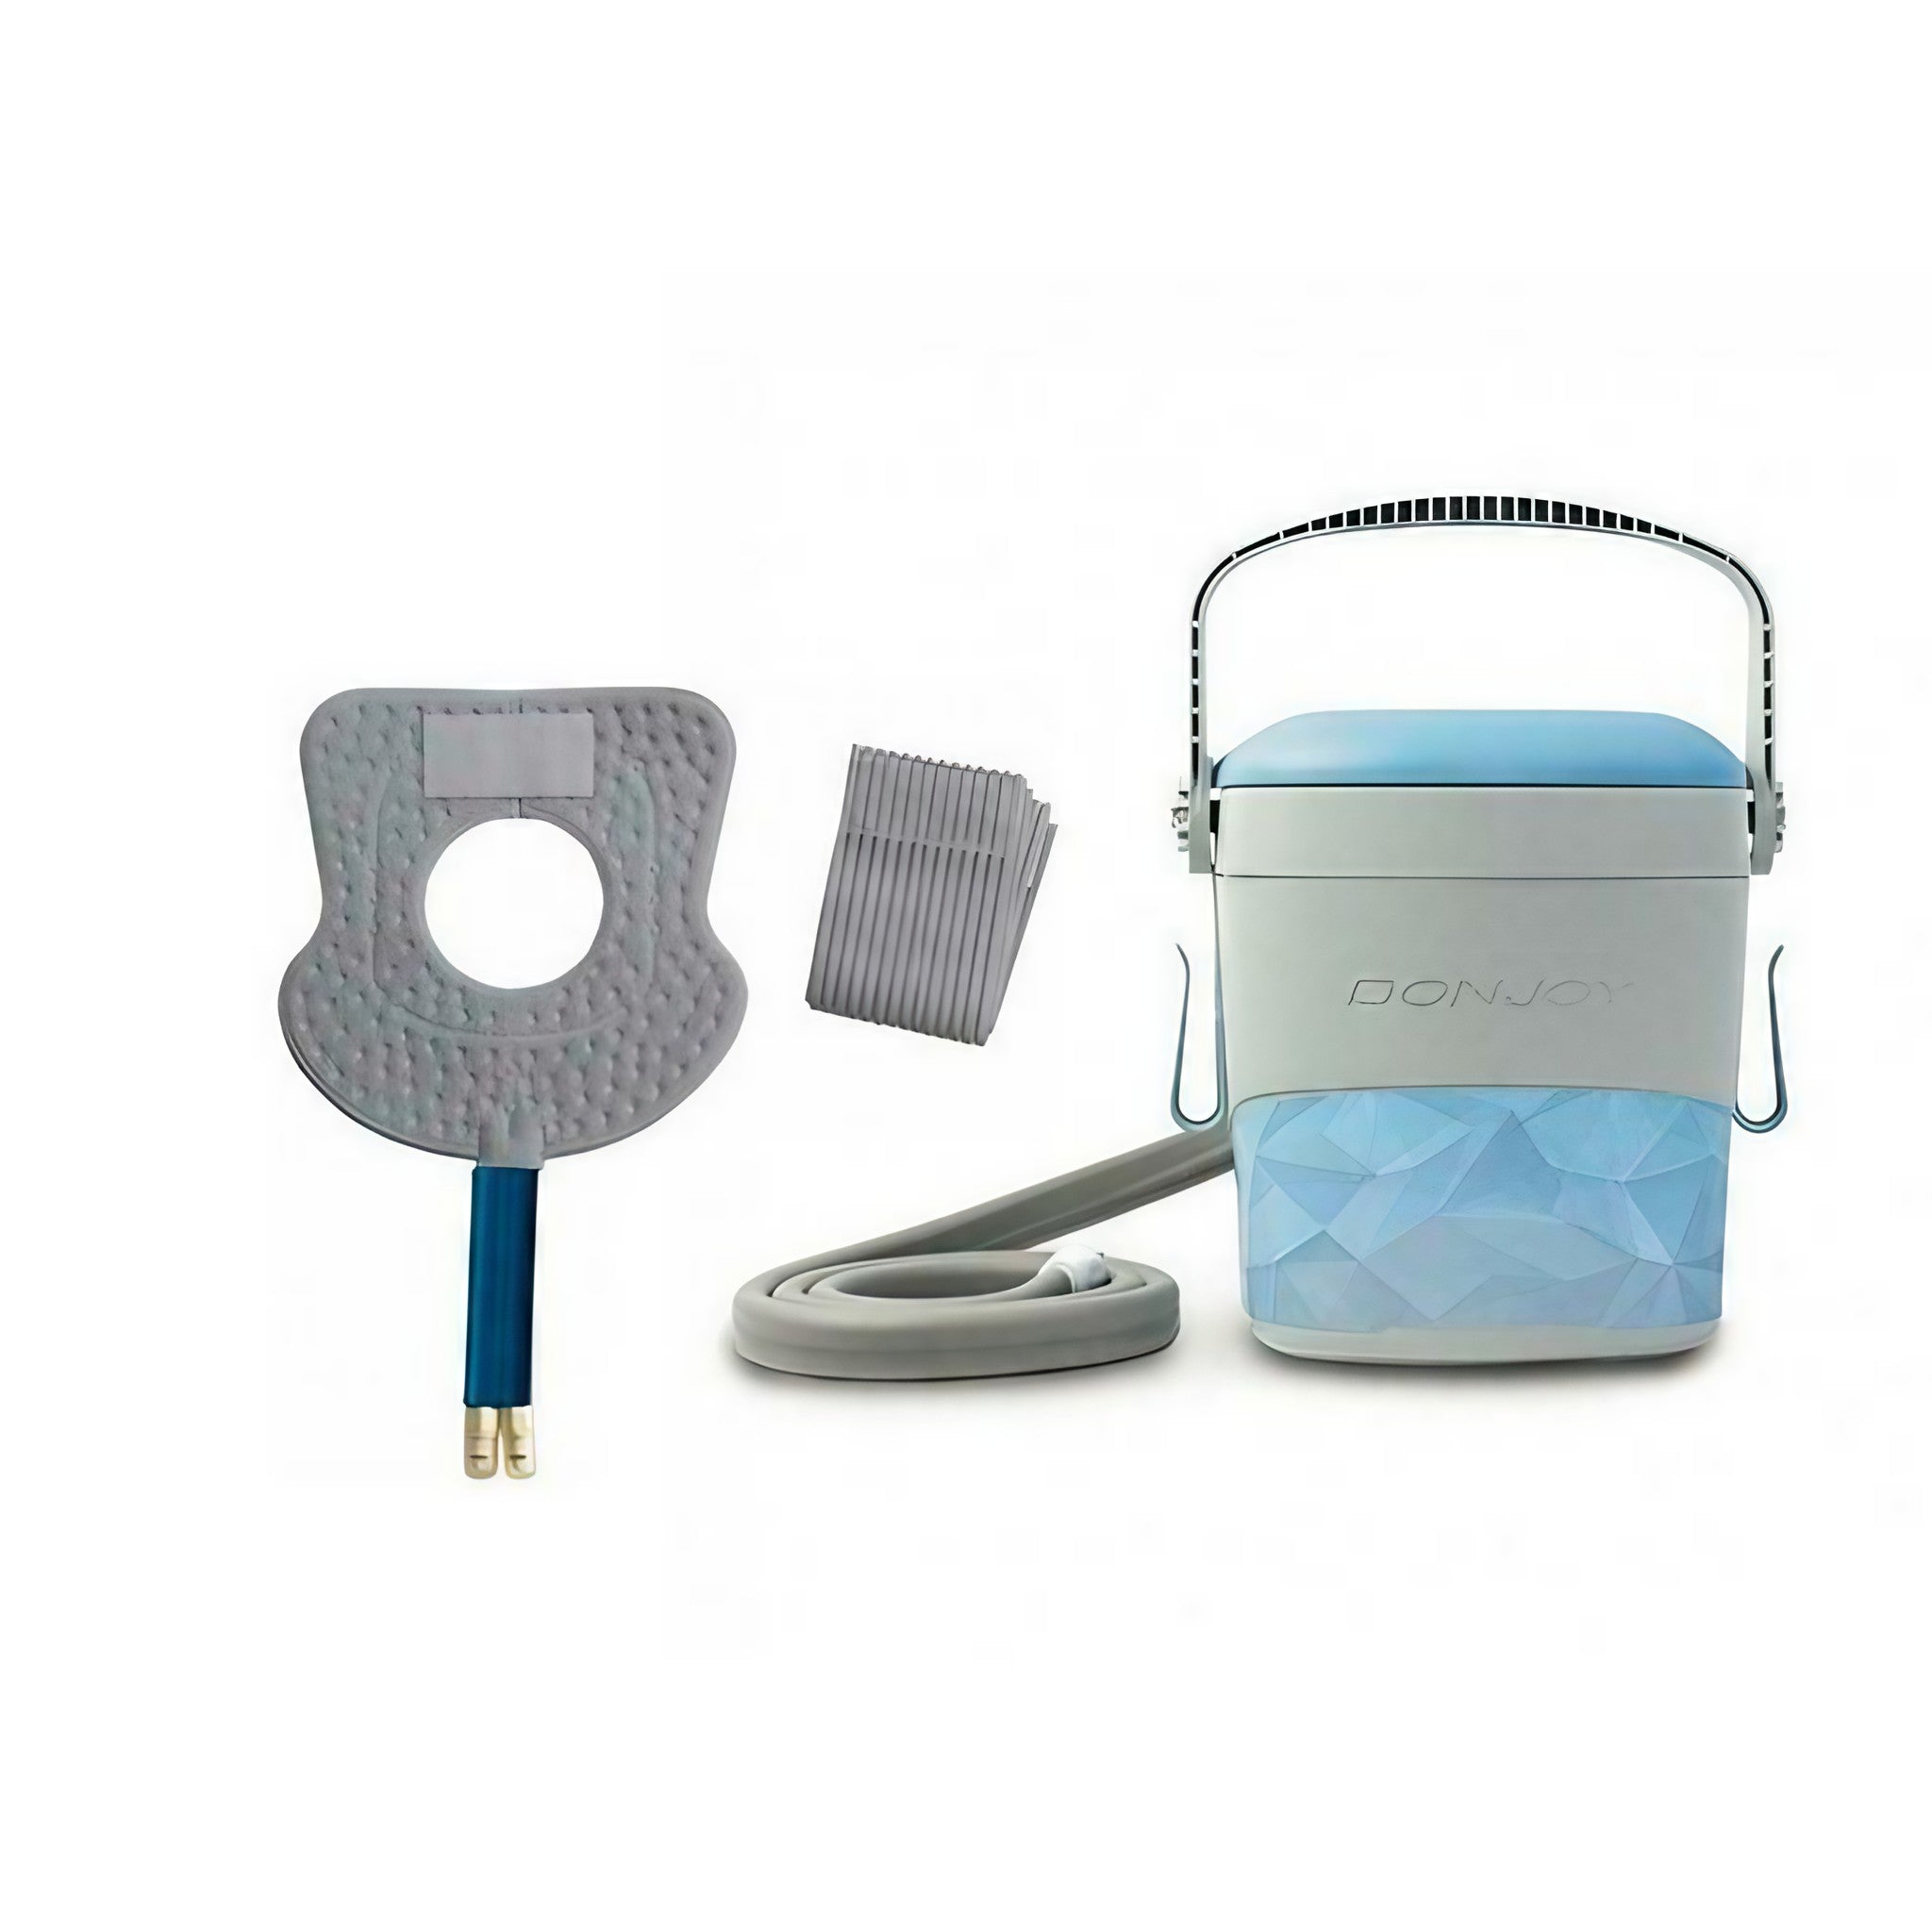 Donjoy Iceman Classic3 Cold Therapy Unit